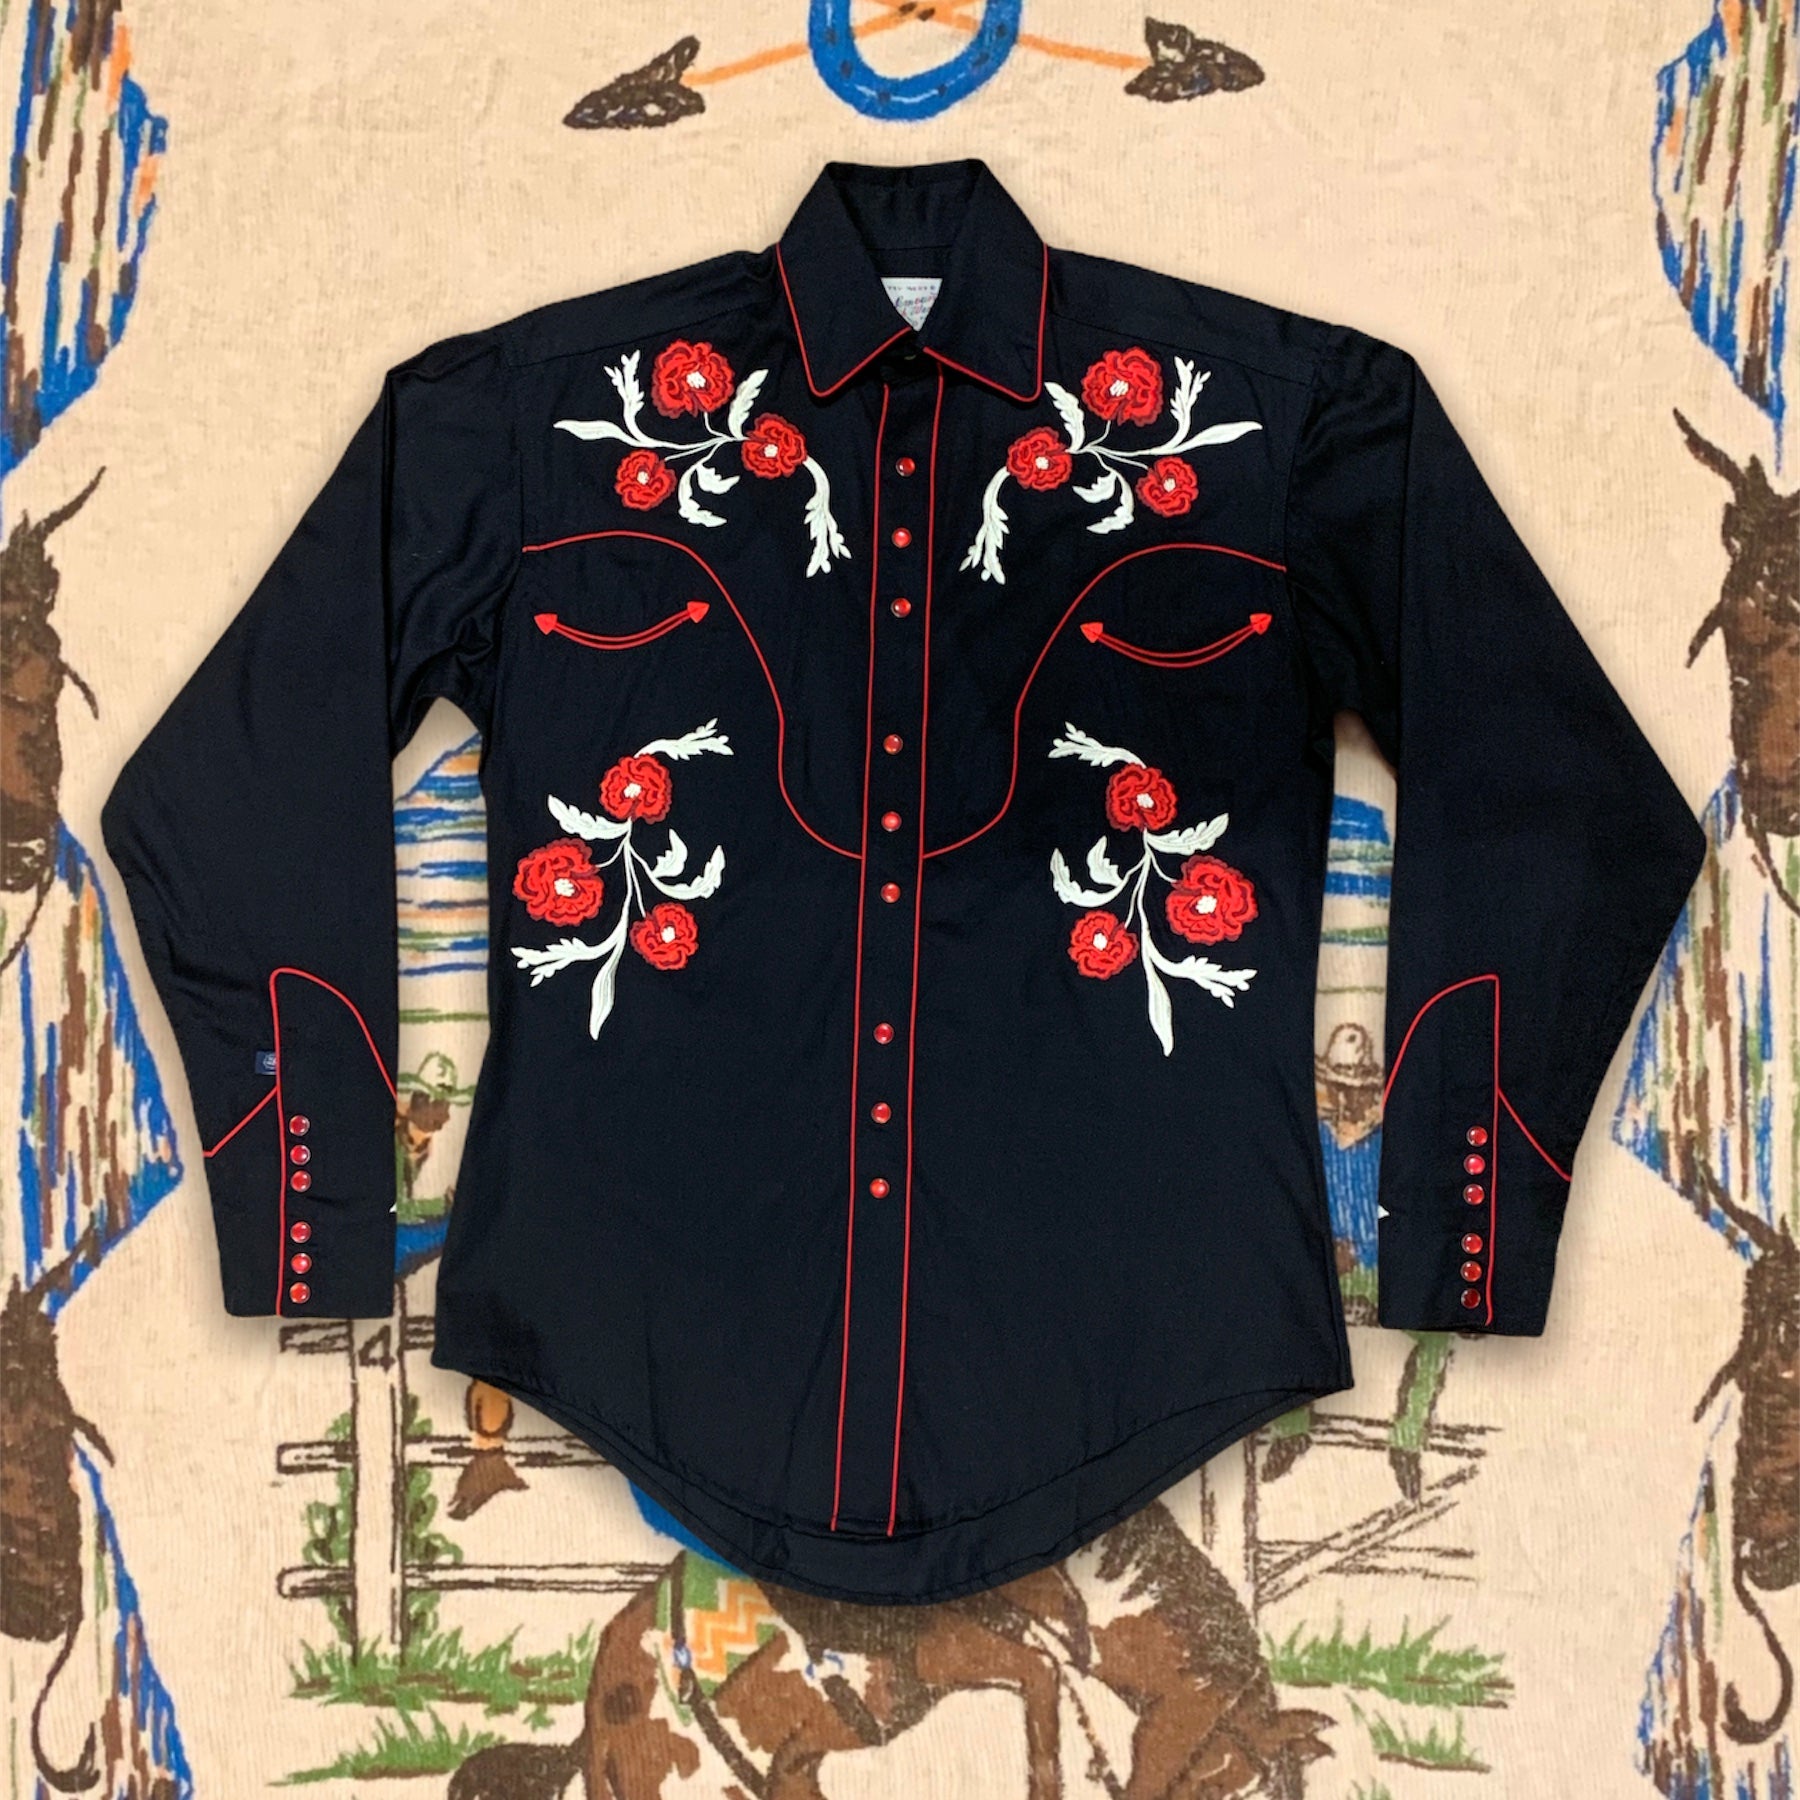 Rockmount Ranch Wear Western Shirt -Cascading Floral Embroidery Black